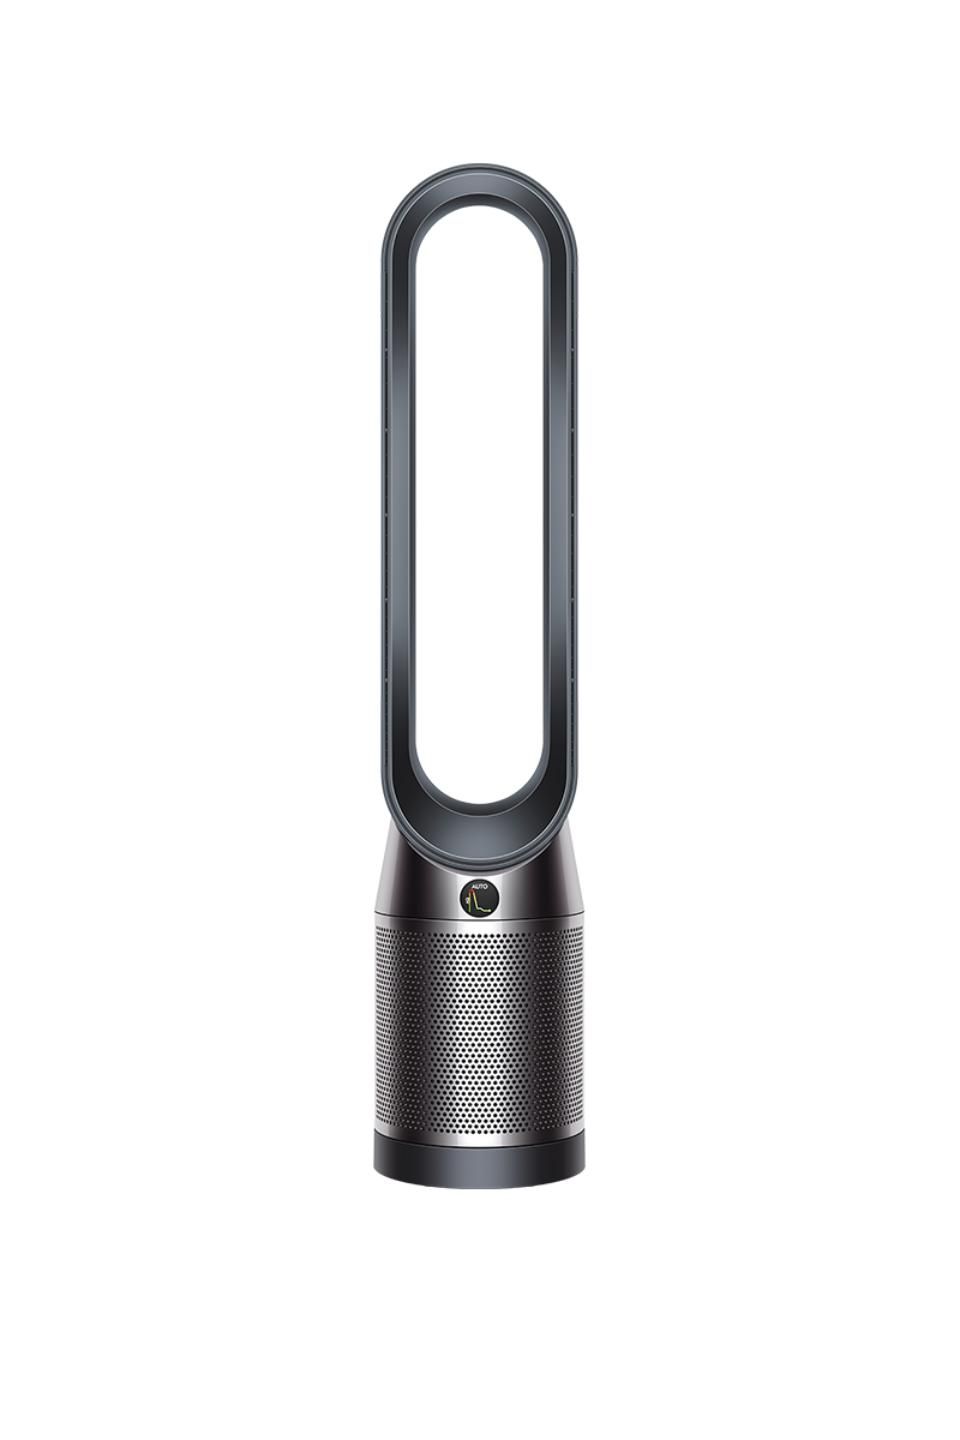 Dyson Pure Cool TP04 Purifying Fan